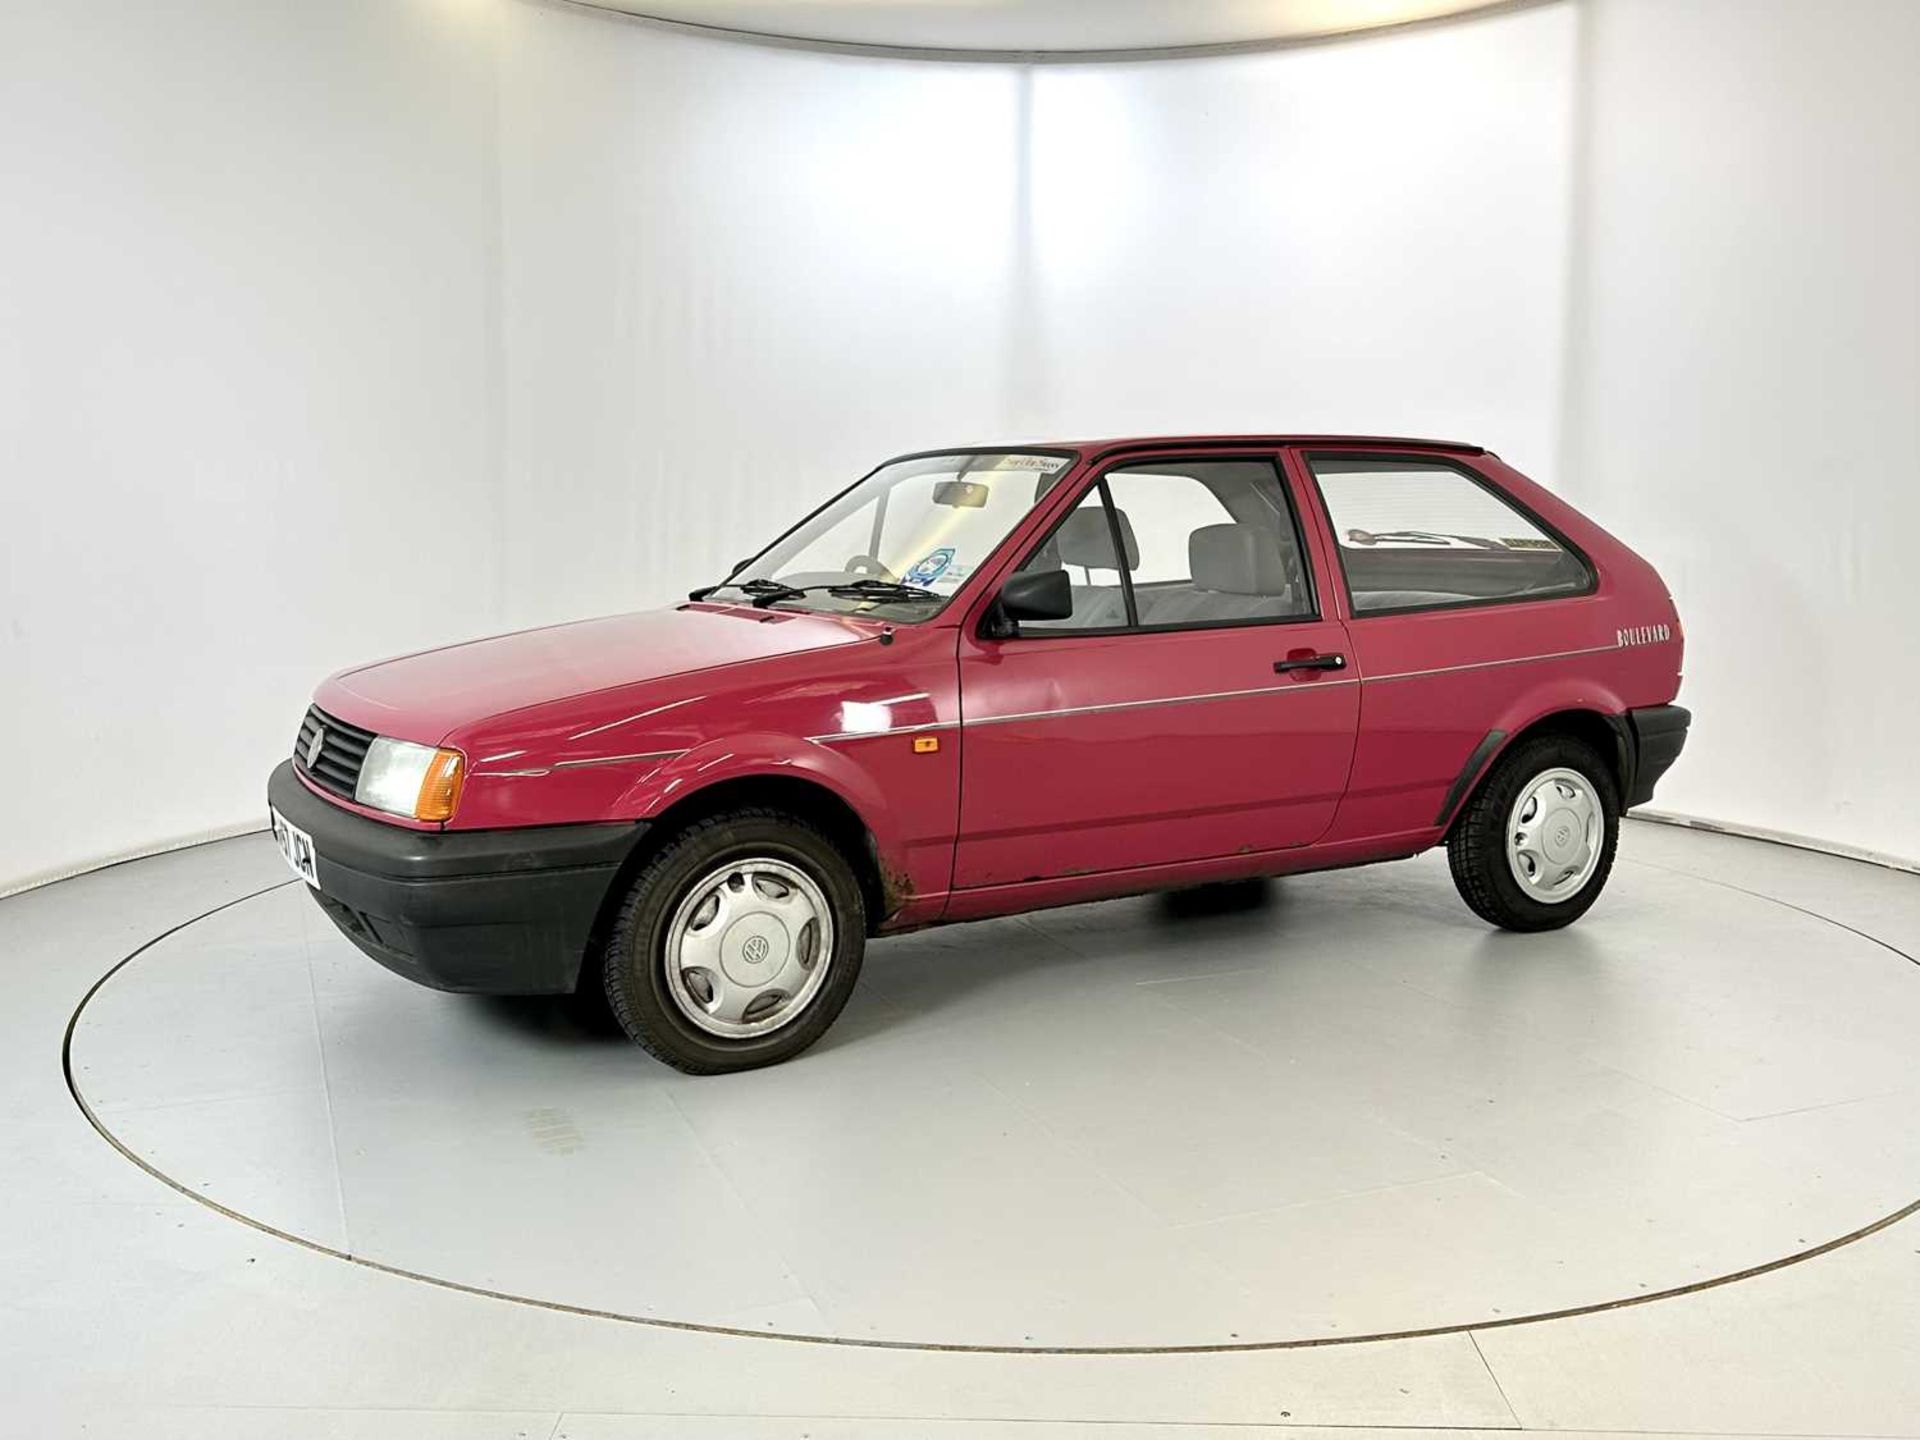 1991 Volkswagen Polo - Image 4 of 29